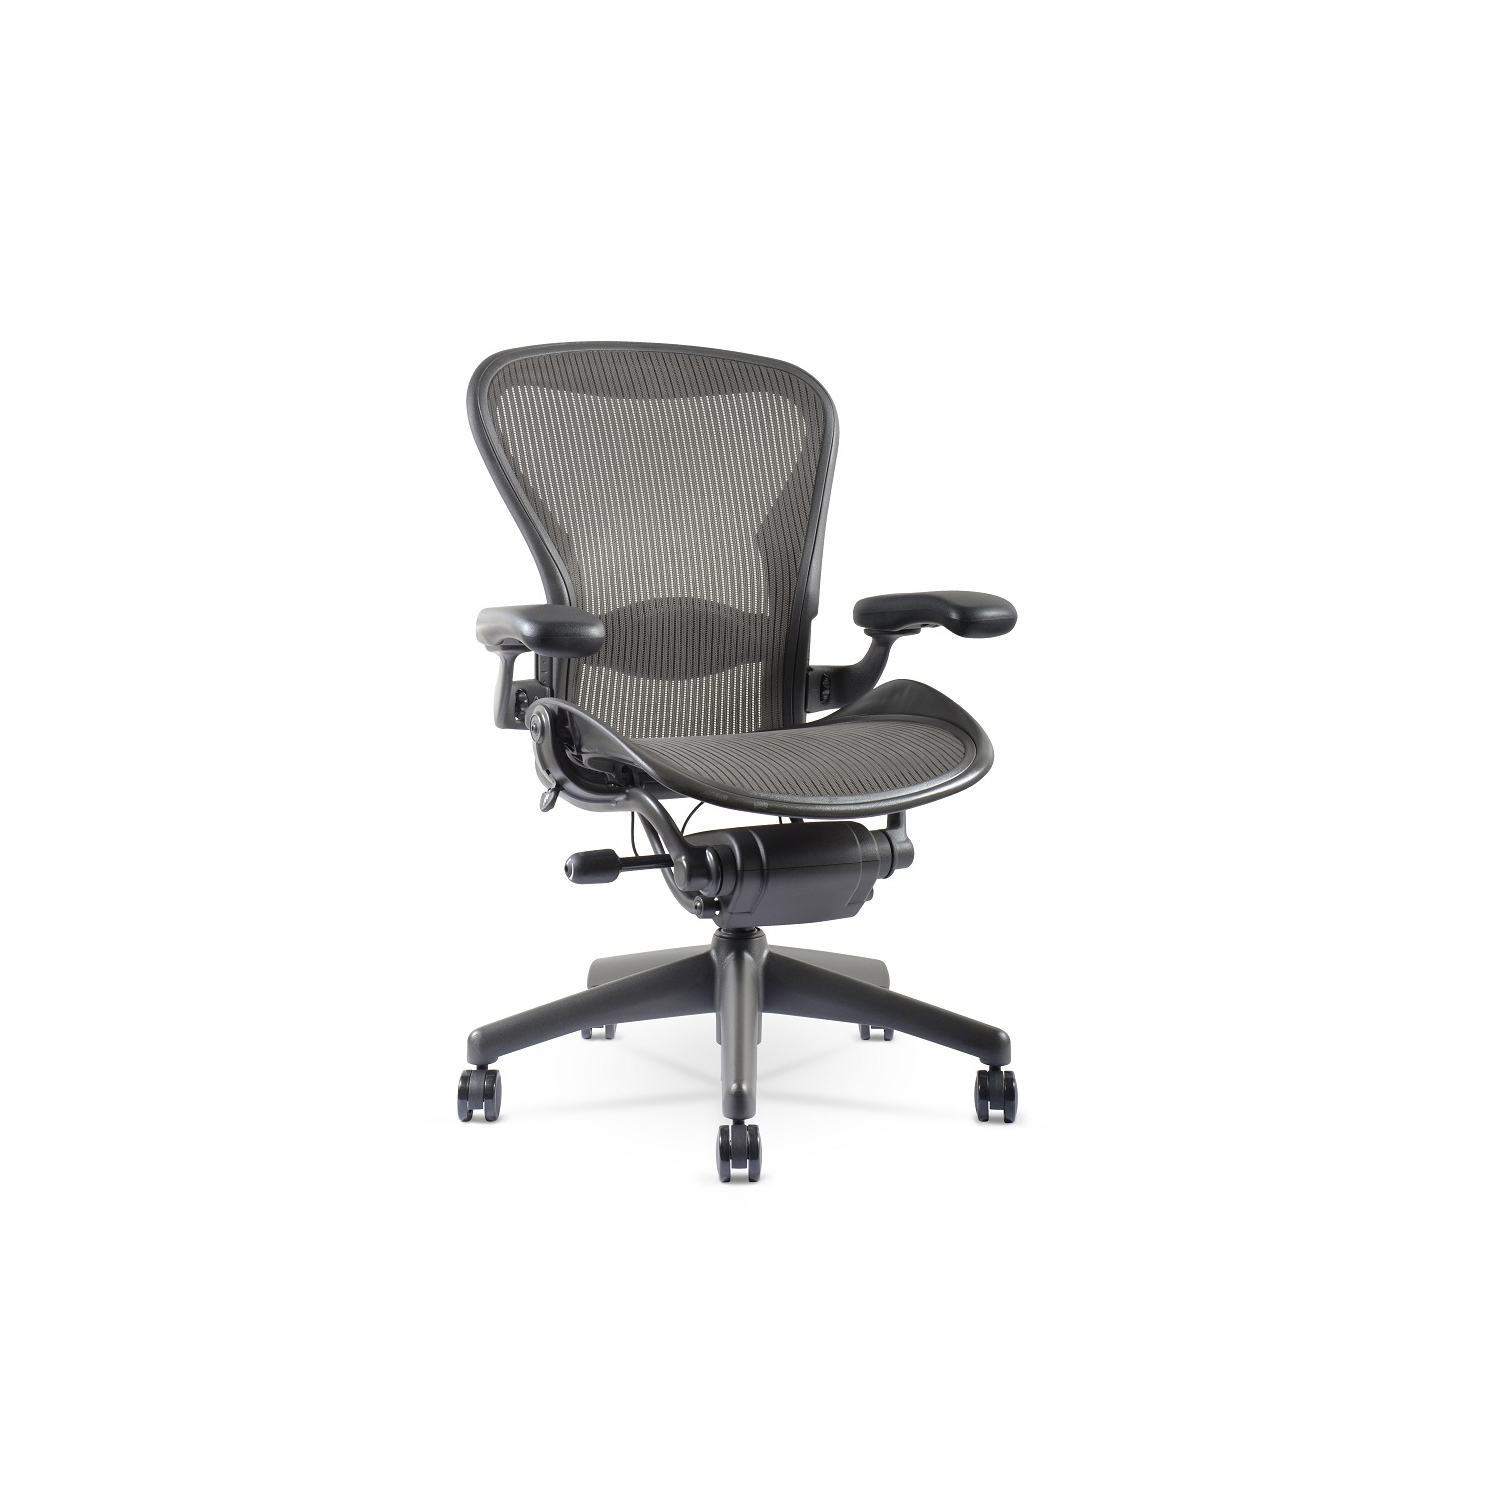 Herman Miller Classic Aeron Chair | Black | Size B | Fully Adjustable | Lumbar Support | Roller Index| Refurbished/Renewed by Chairorama